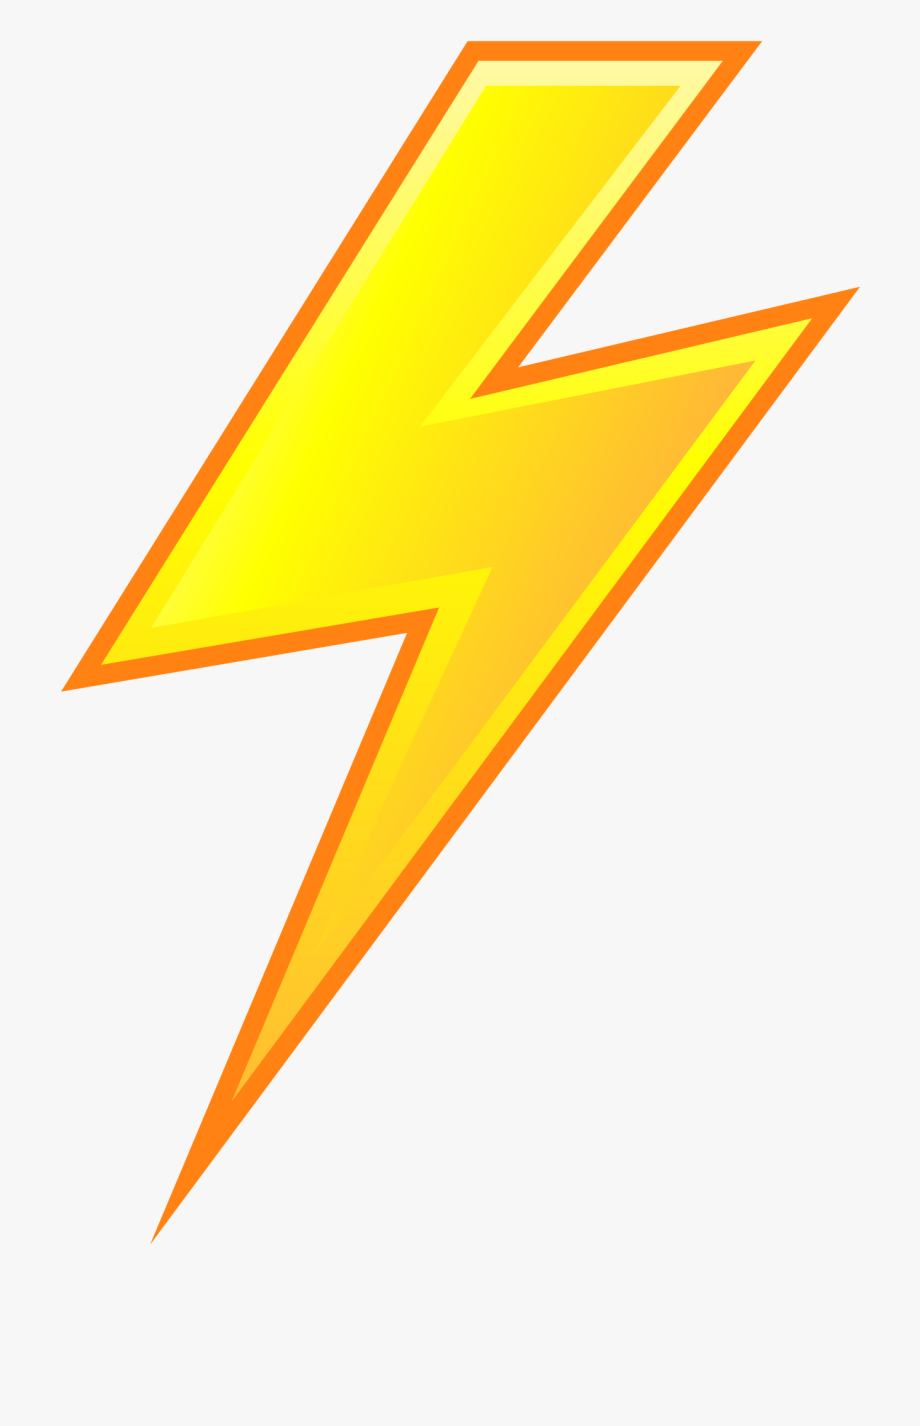 Electricity clipart lightning.